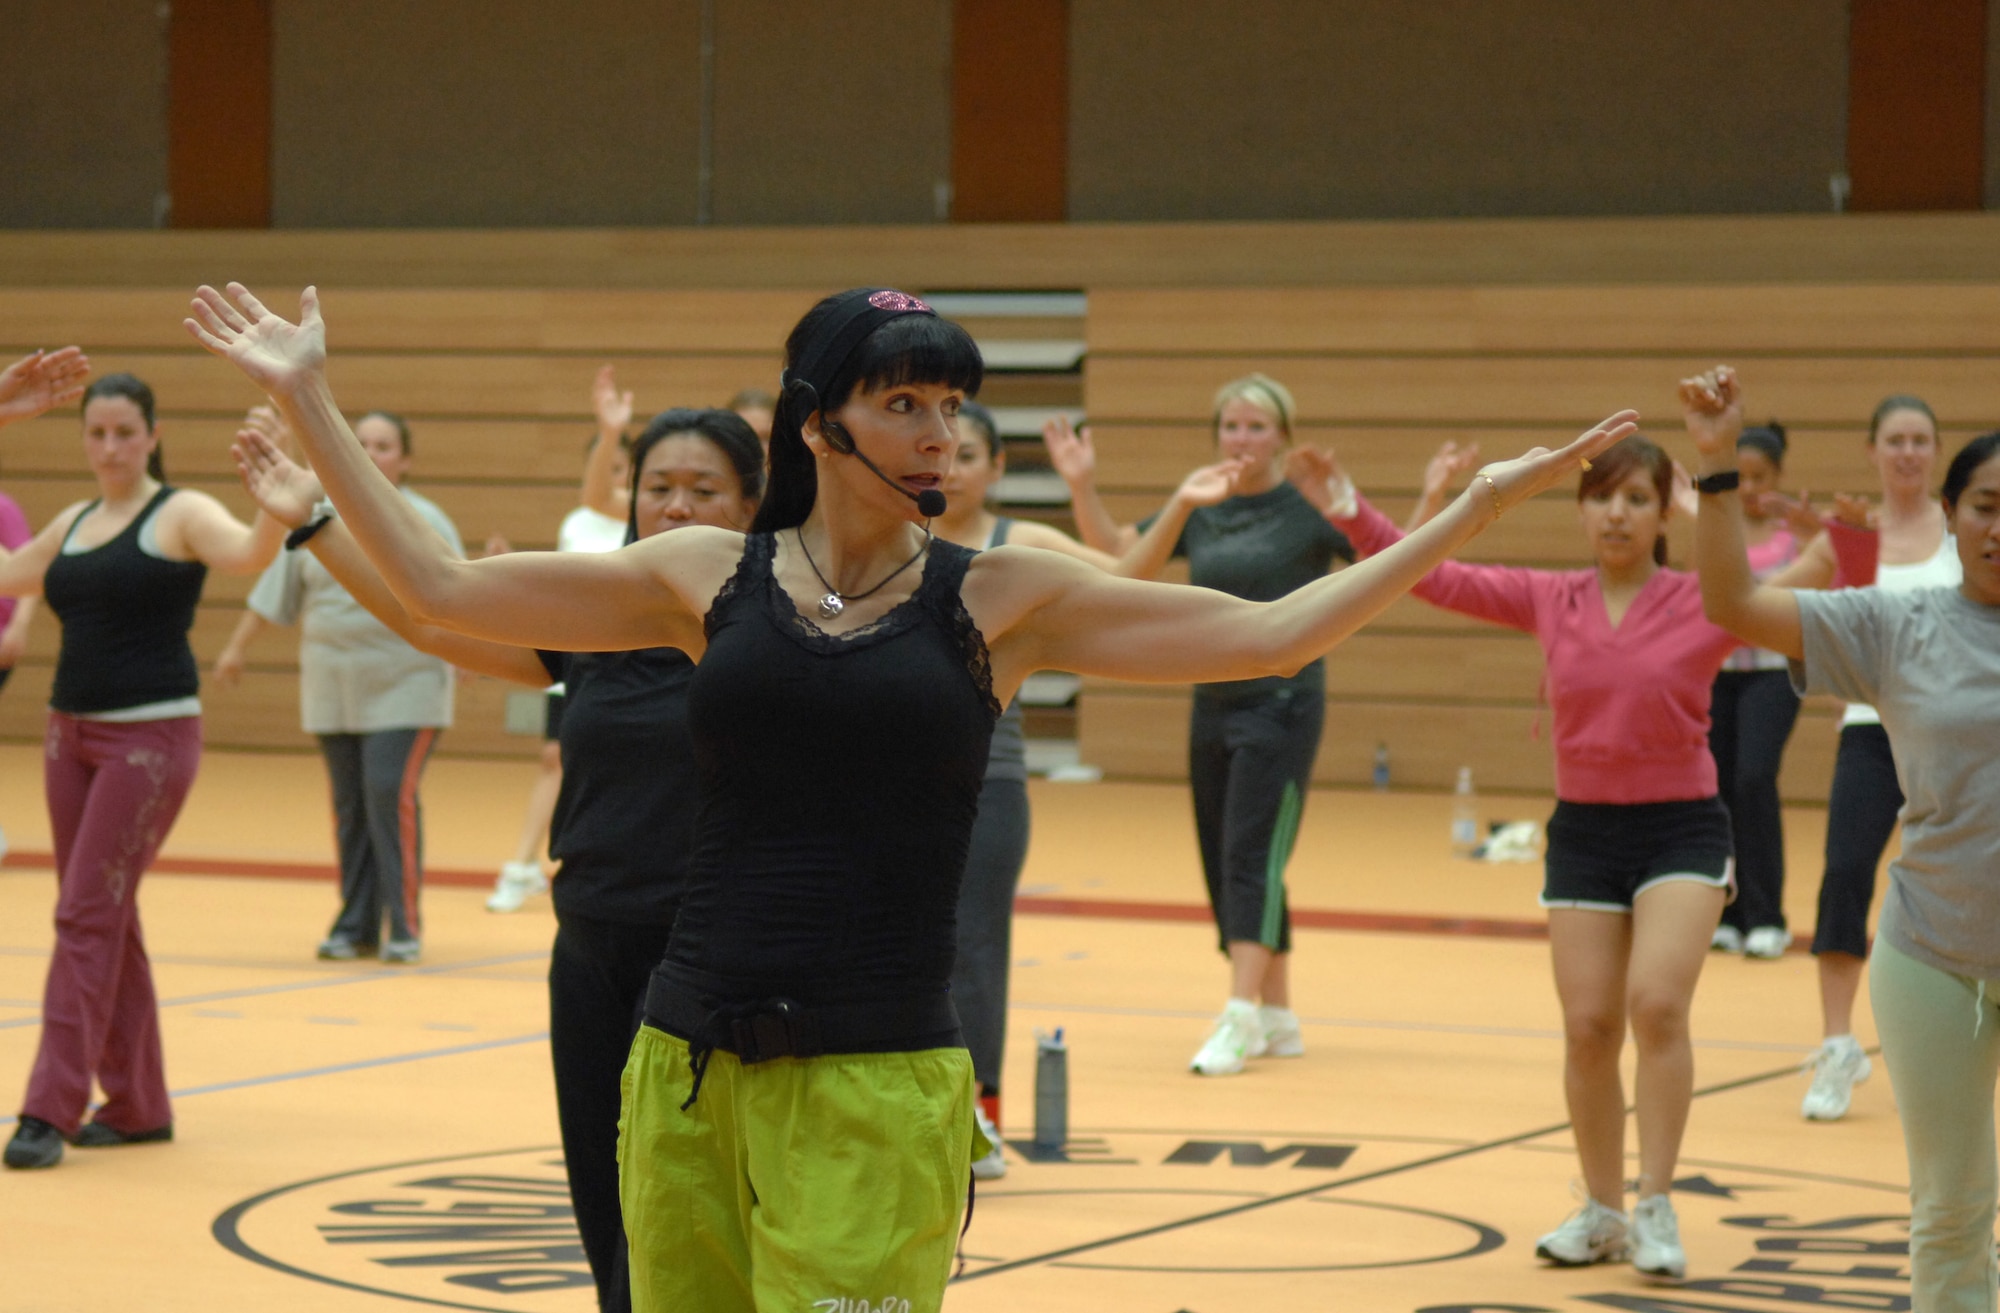 SPANGDAHLEM AIR BASE, Germany – Lisa J. Hamlin, director of international military relations for the Aerobics and Fitness Association of America, instructs a Zumba class at the Skelton Memorial Fitness Center Sept. 25. Zumba is a mixture of latin, hip-hop, and reggaeton. It incorporates dancing and fitness, allowing its users to burn between 700 to 800 calories an hour. (U.S. Air Force photo/Airman 1st Class Staci Miller)